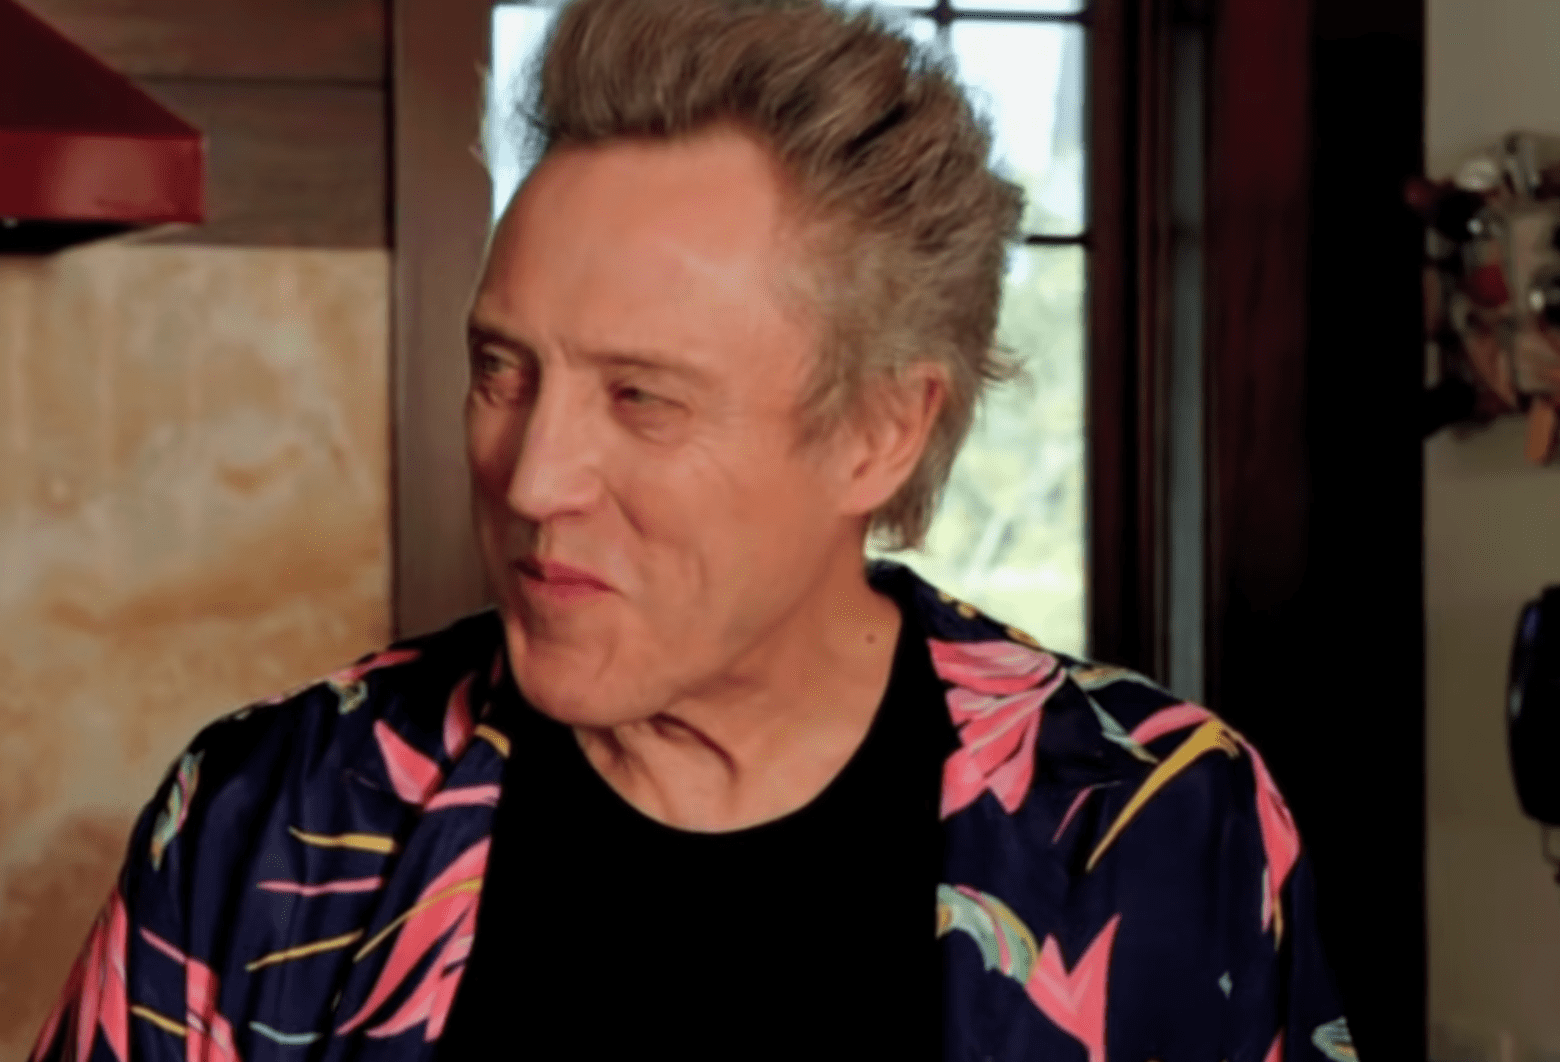 Christopher Walken at his Connecticut house, 2012 | Source: www.youtube.com/c/FunnyOrDie